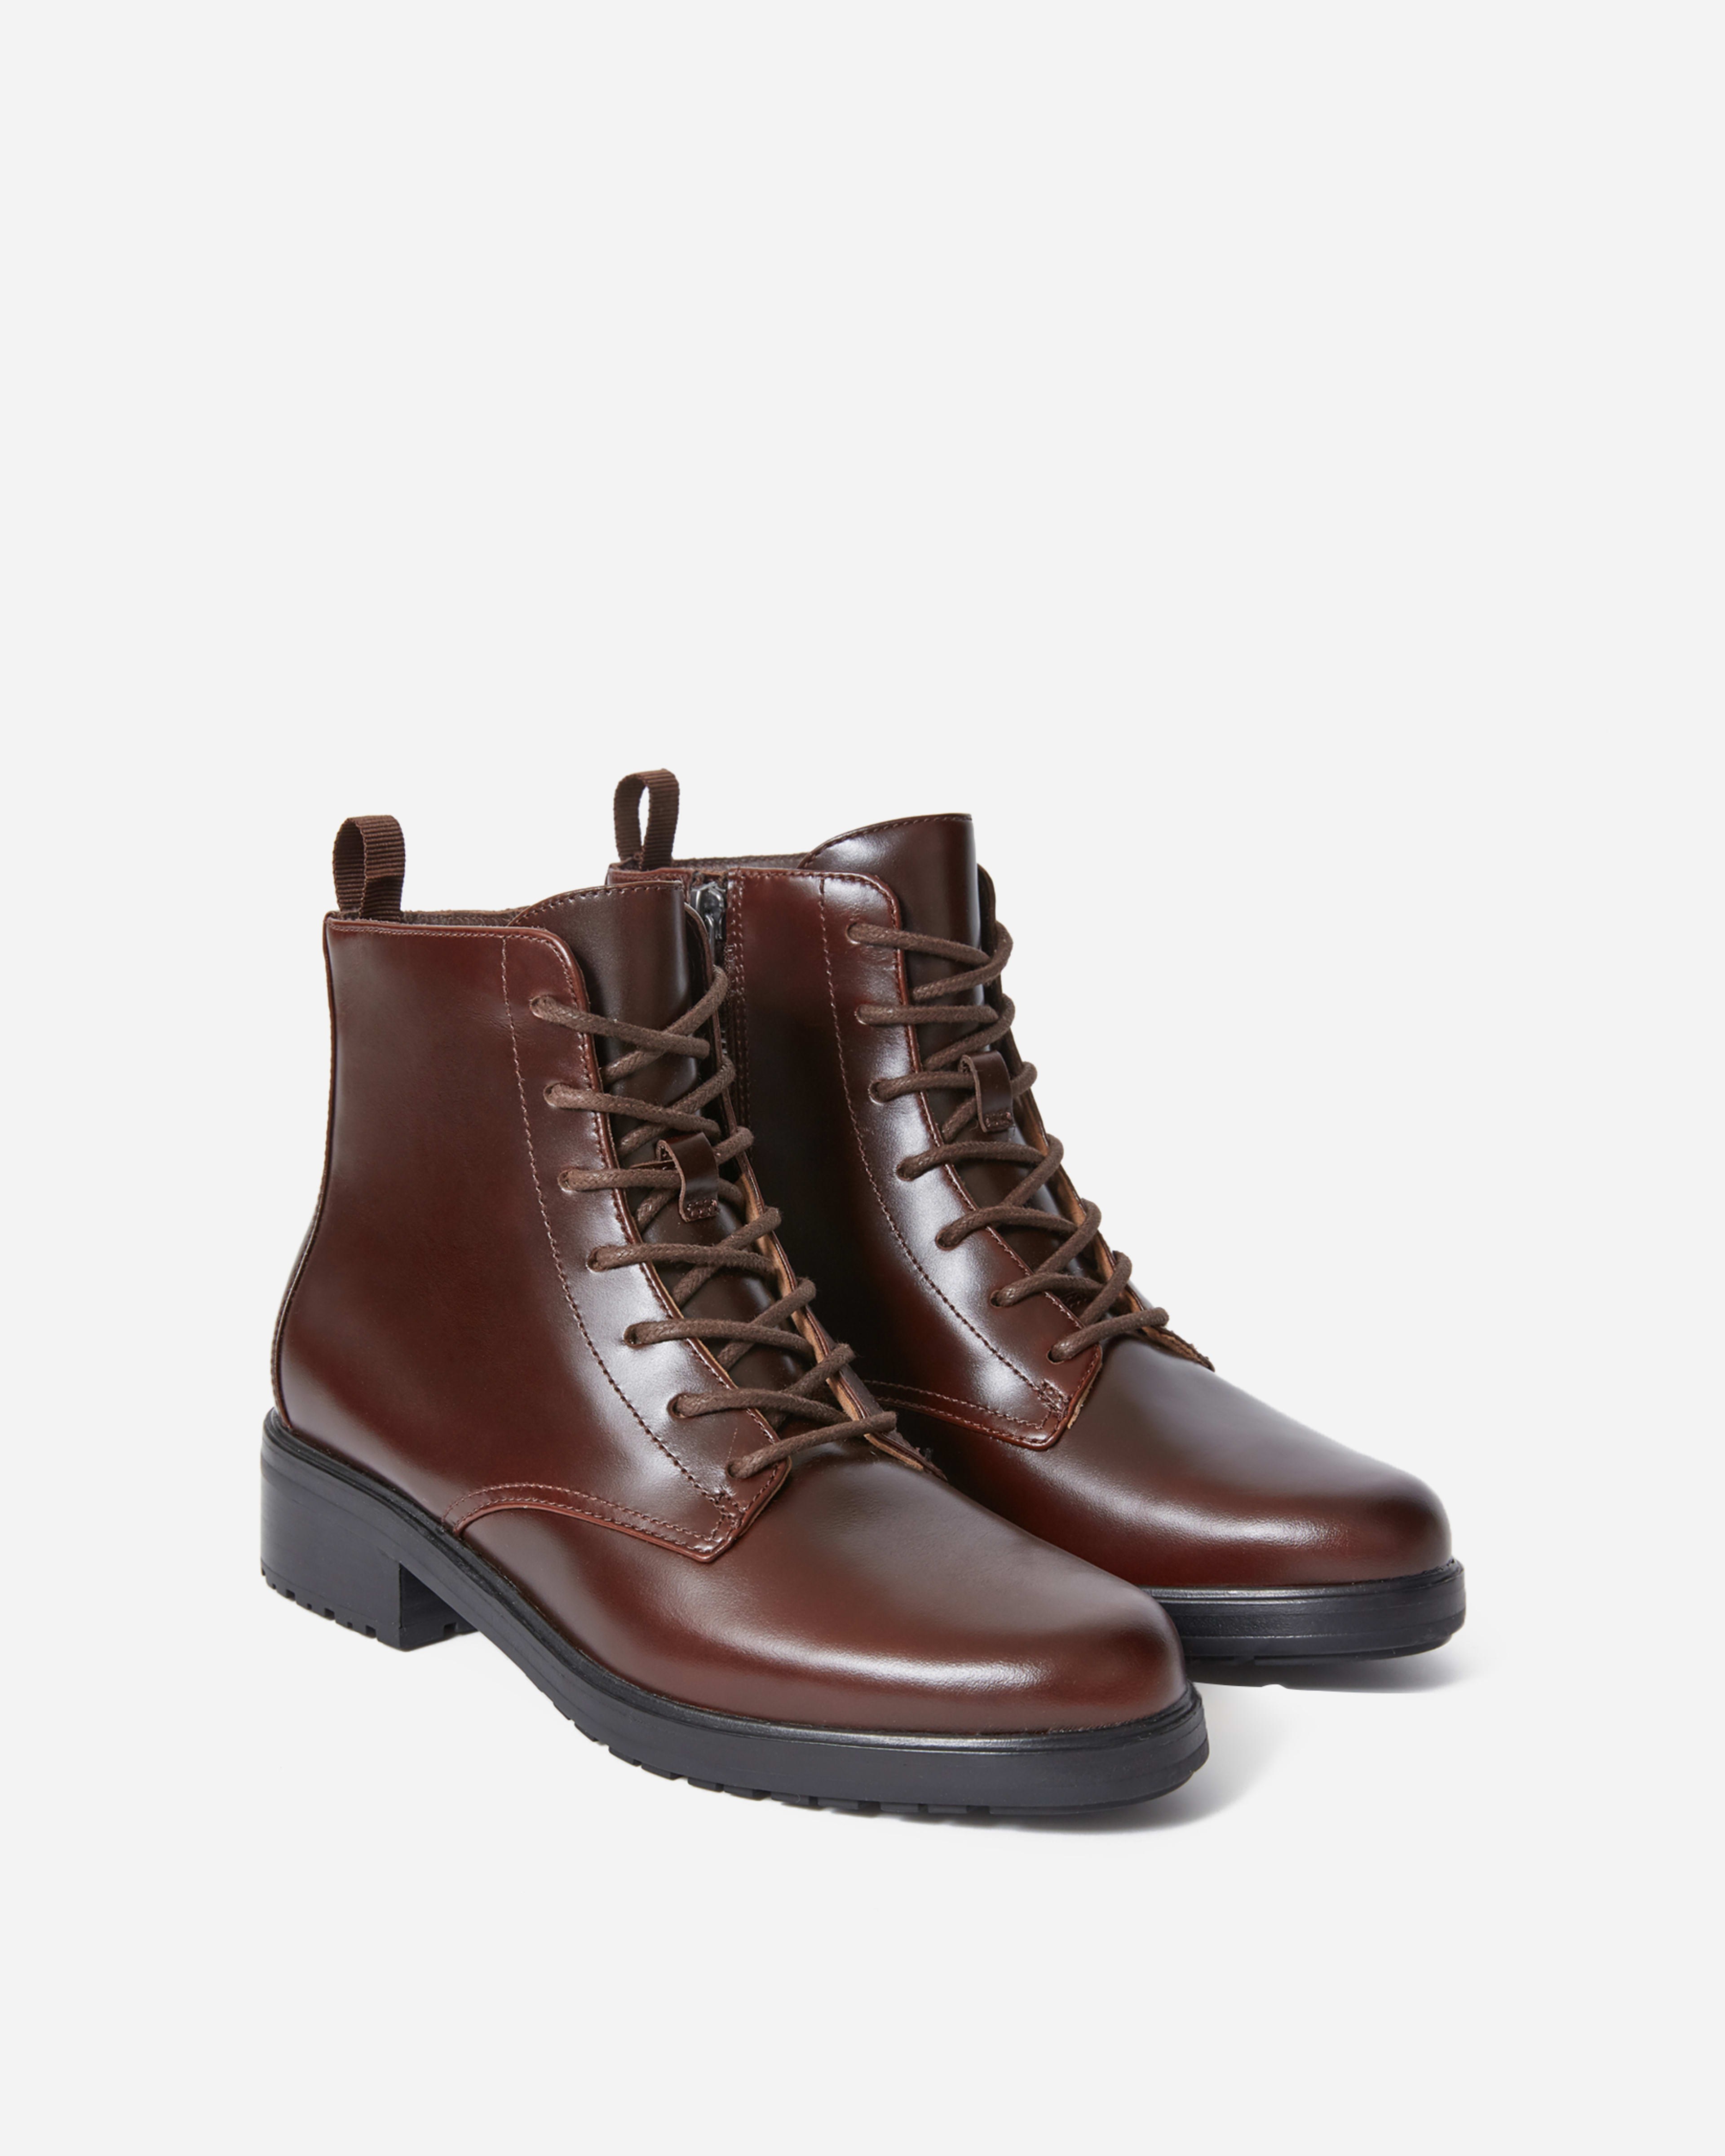 The Modern Utility Lace-Up Boot Chocolate – Everlane